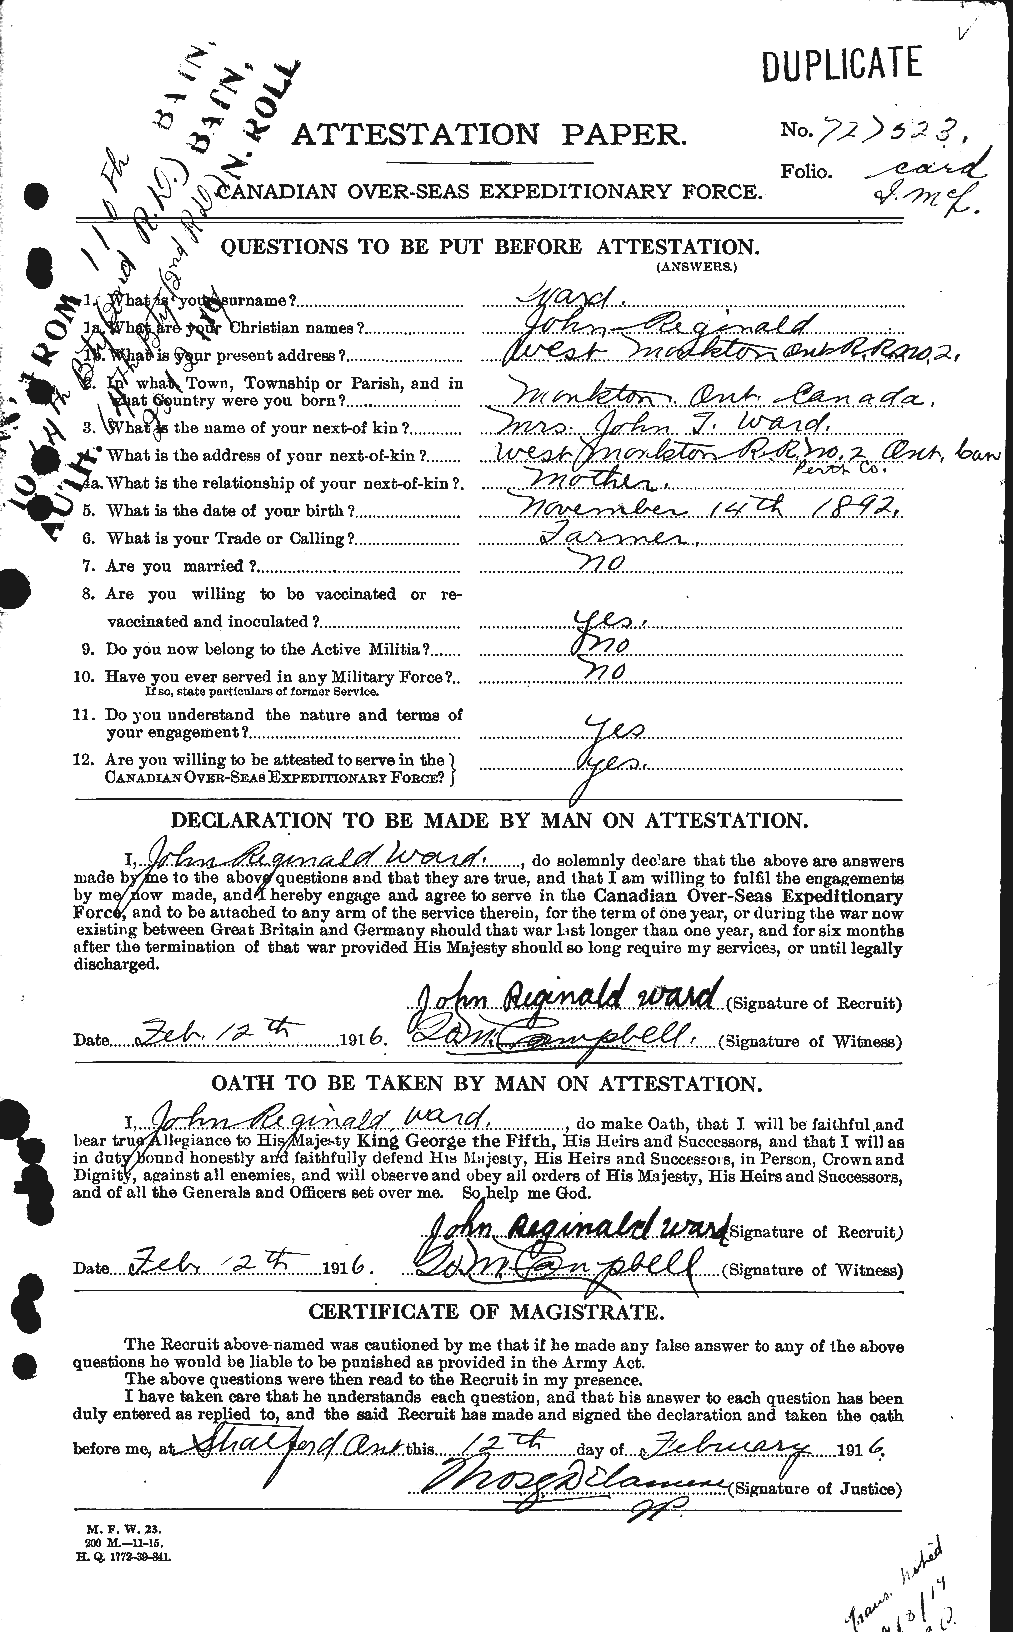 Personnel Records of the First World War - CEF 659535a